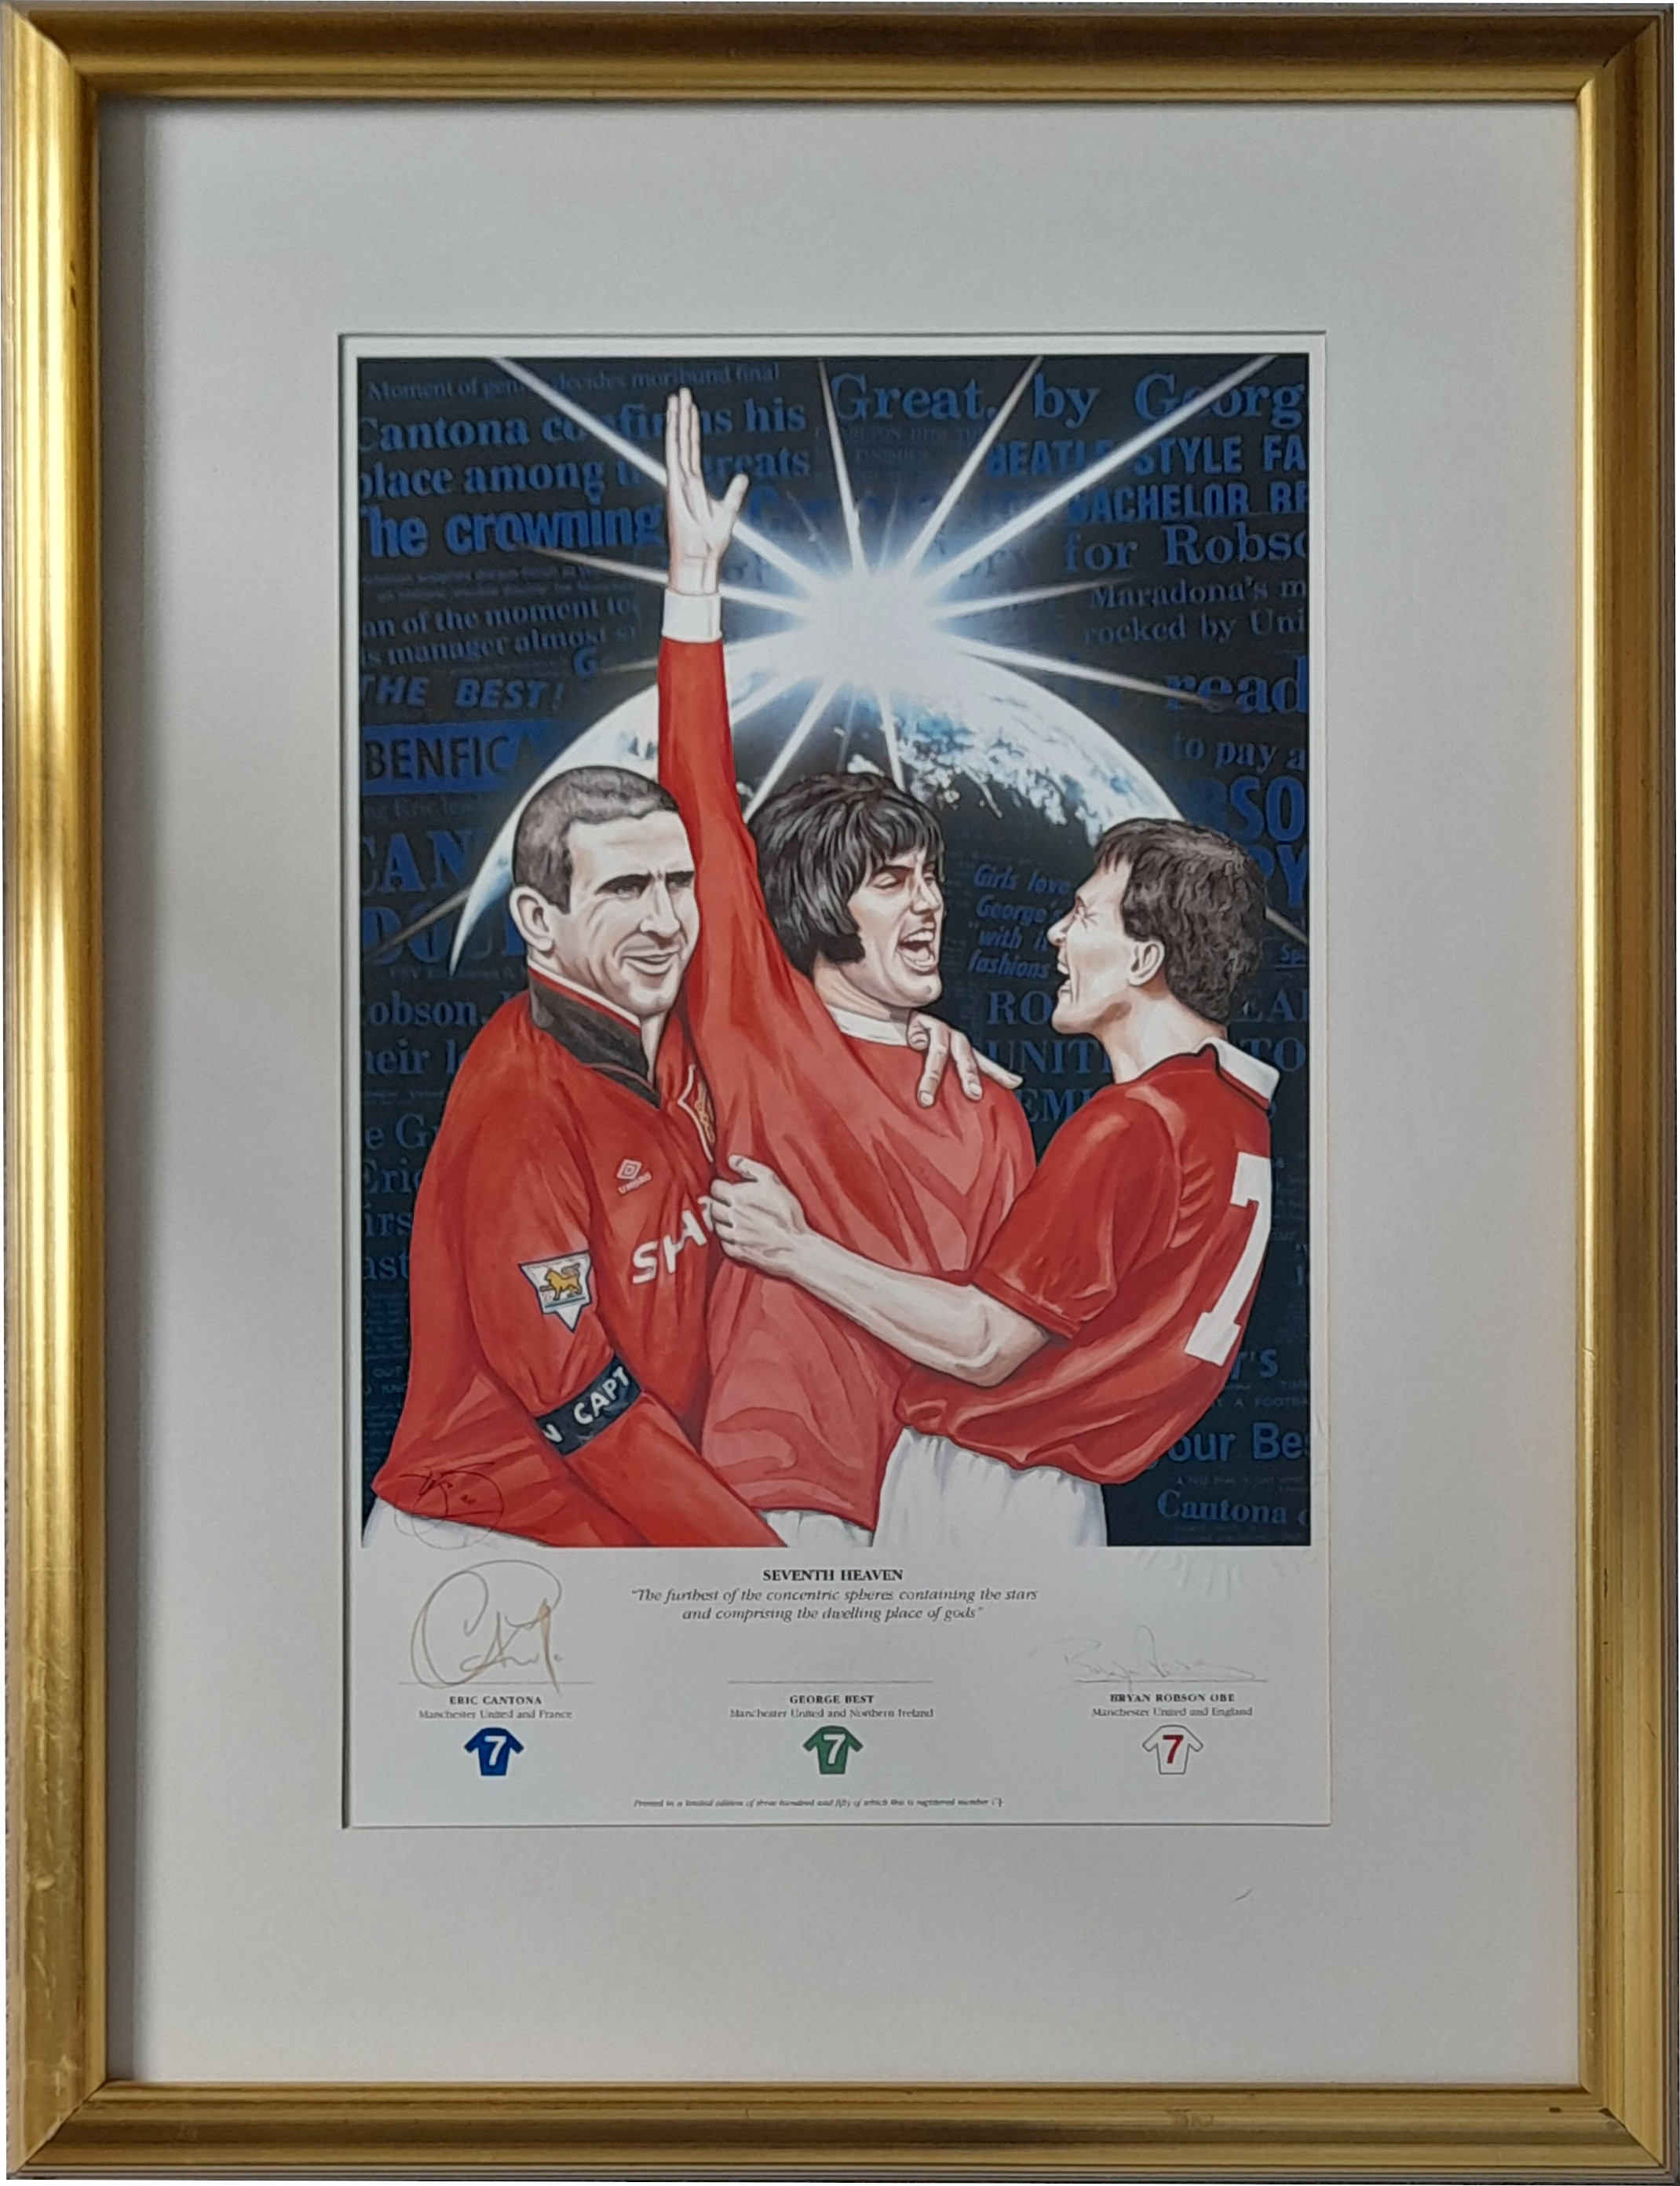 MANCHESTER UNITED SEVENTH HEAVEN LITHOGRAPH SIGNED BY ERIC CANTONA, GEORGE BEST & BRYAN ROBSON